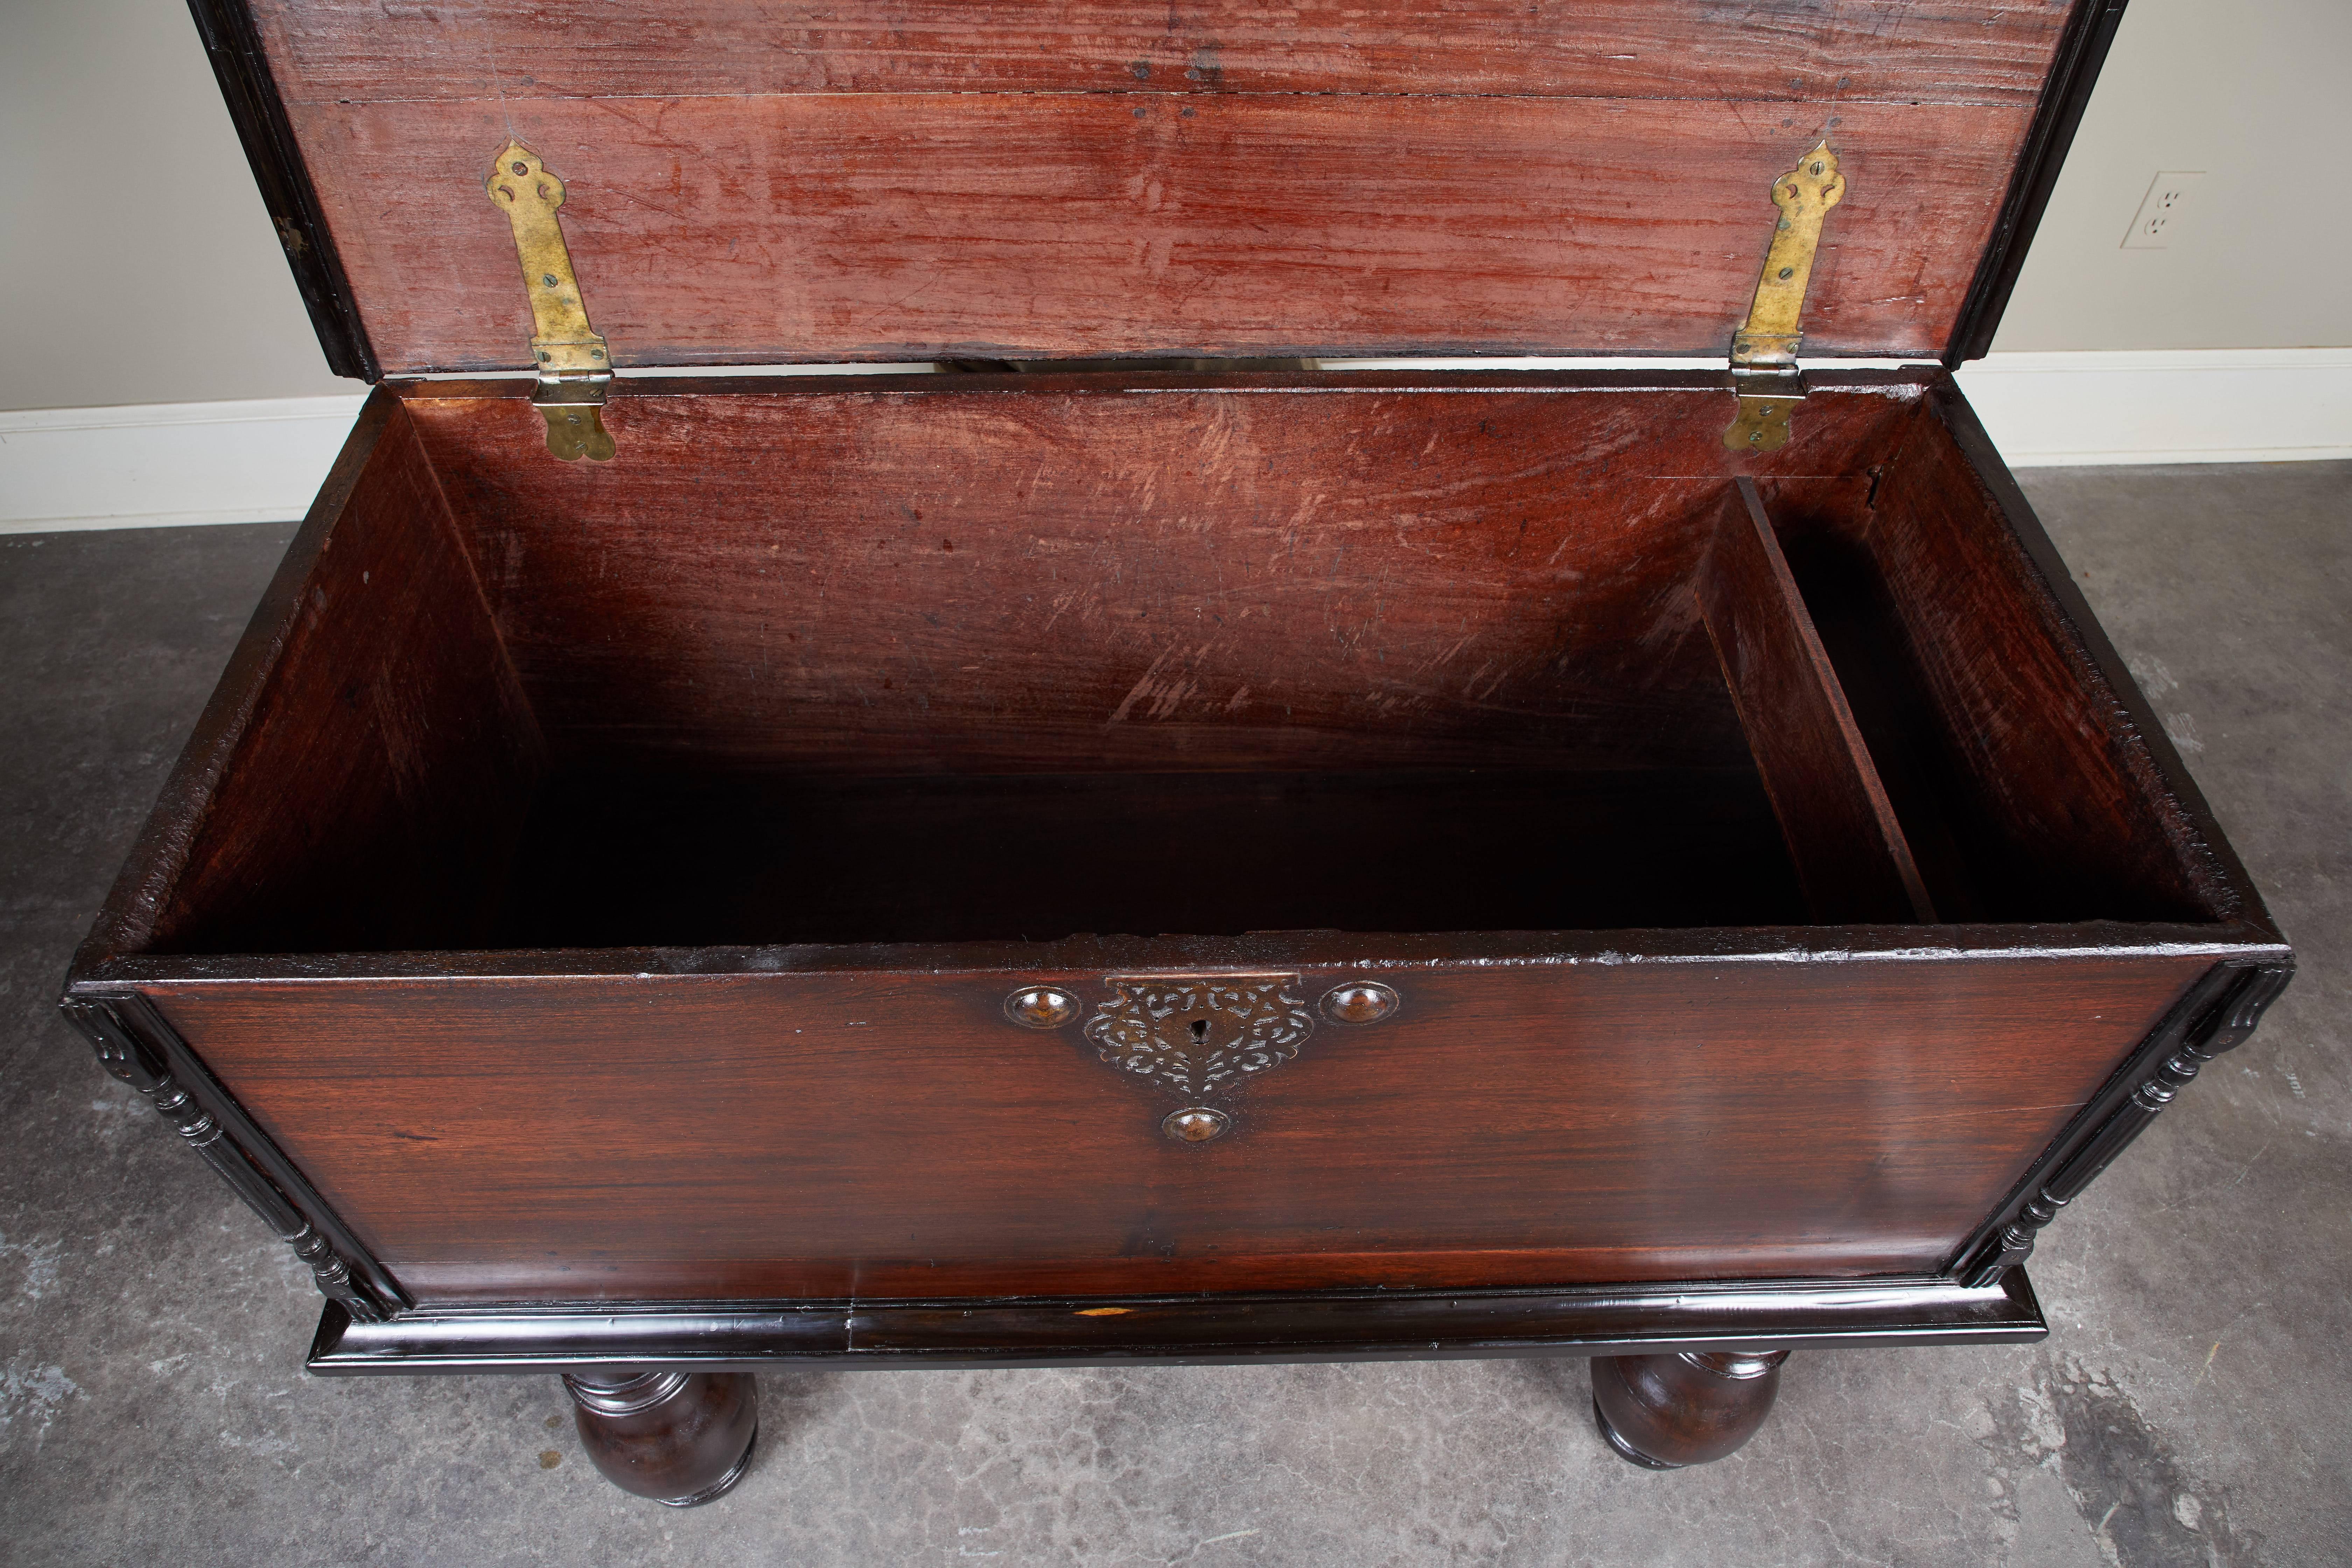 19th Century British Colonial Jakwood and Ebony Trunk In Good Condition For Sale In Pasadena, CA